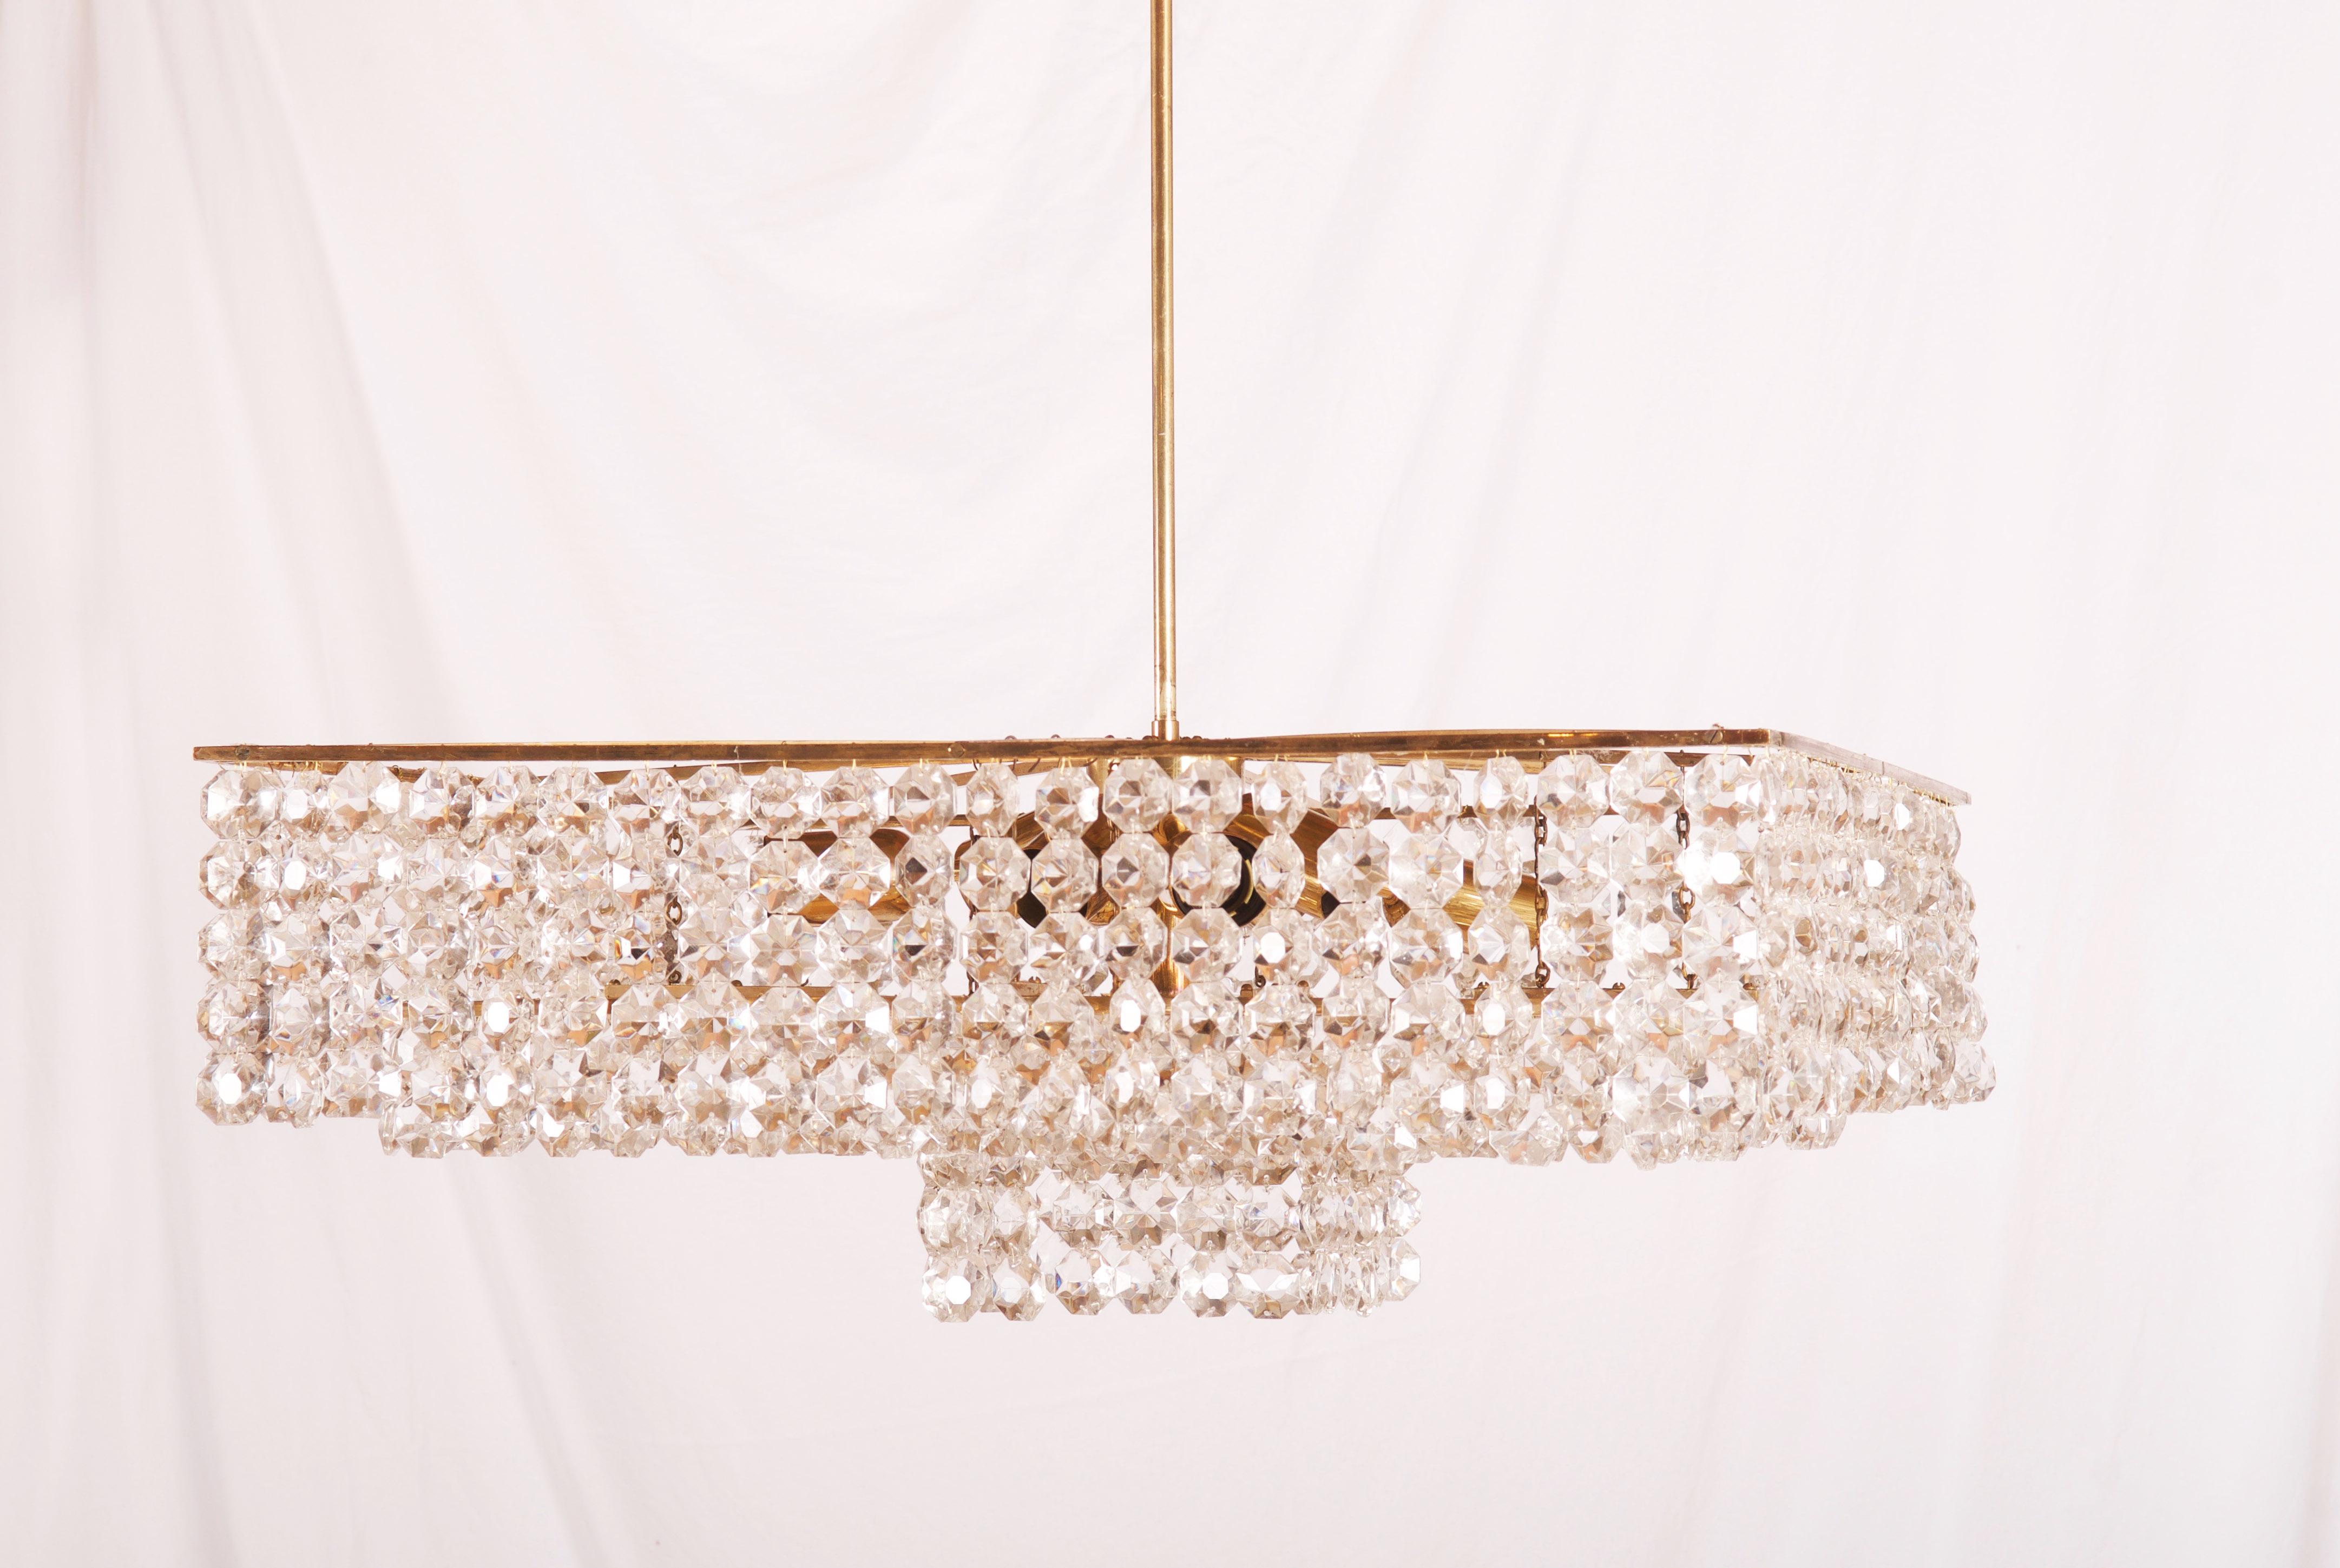 Mid-20th Century Midcentury Square Cut Crystal Chandelier For Sale